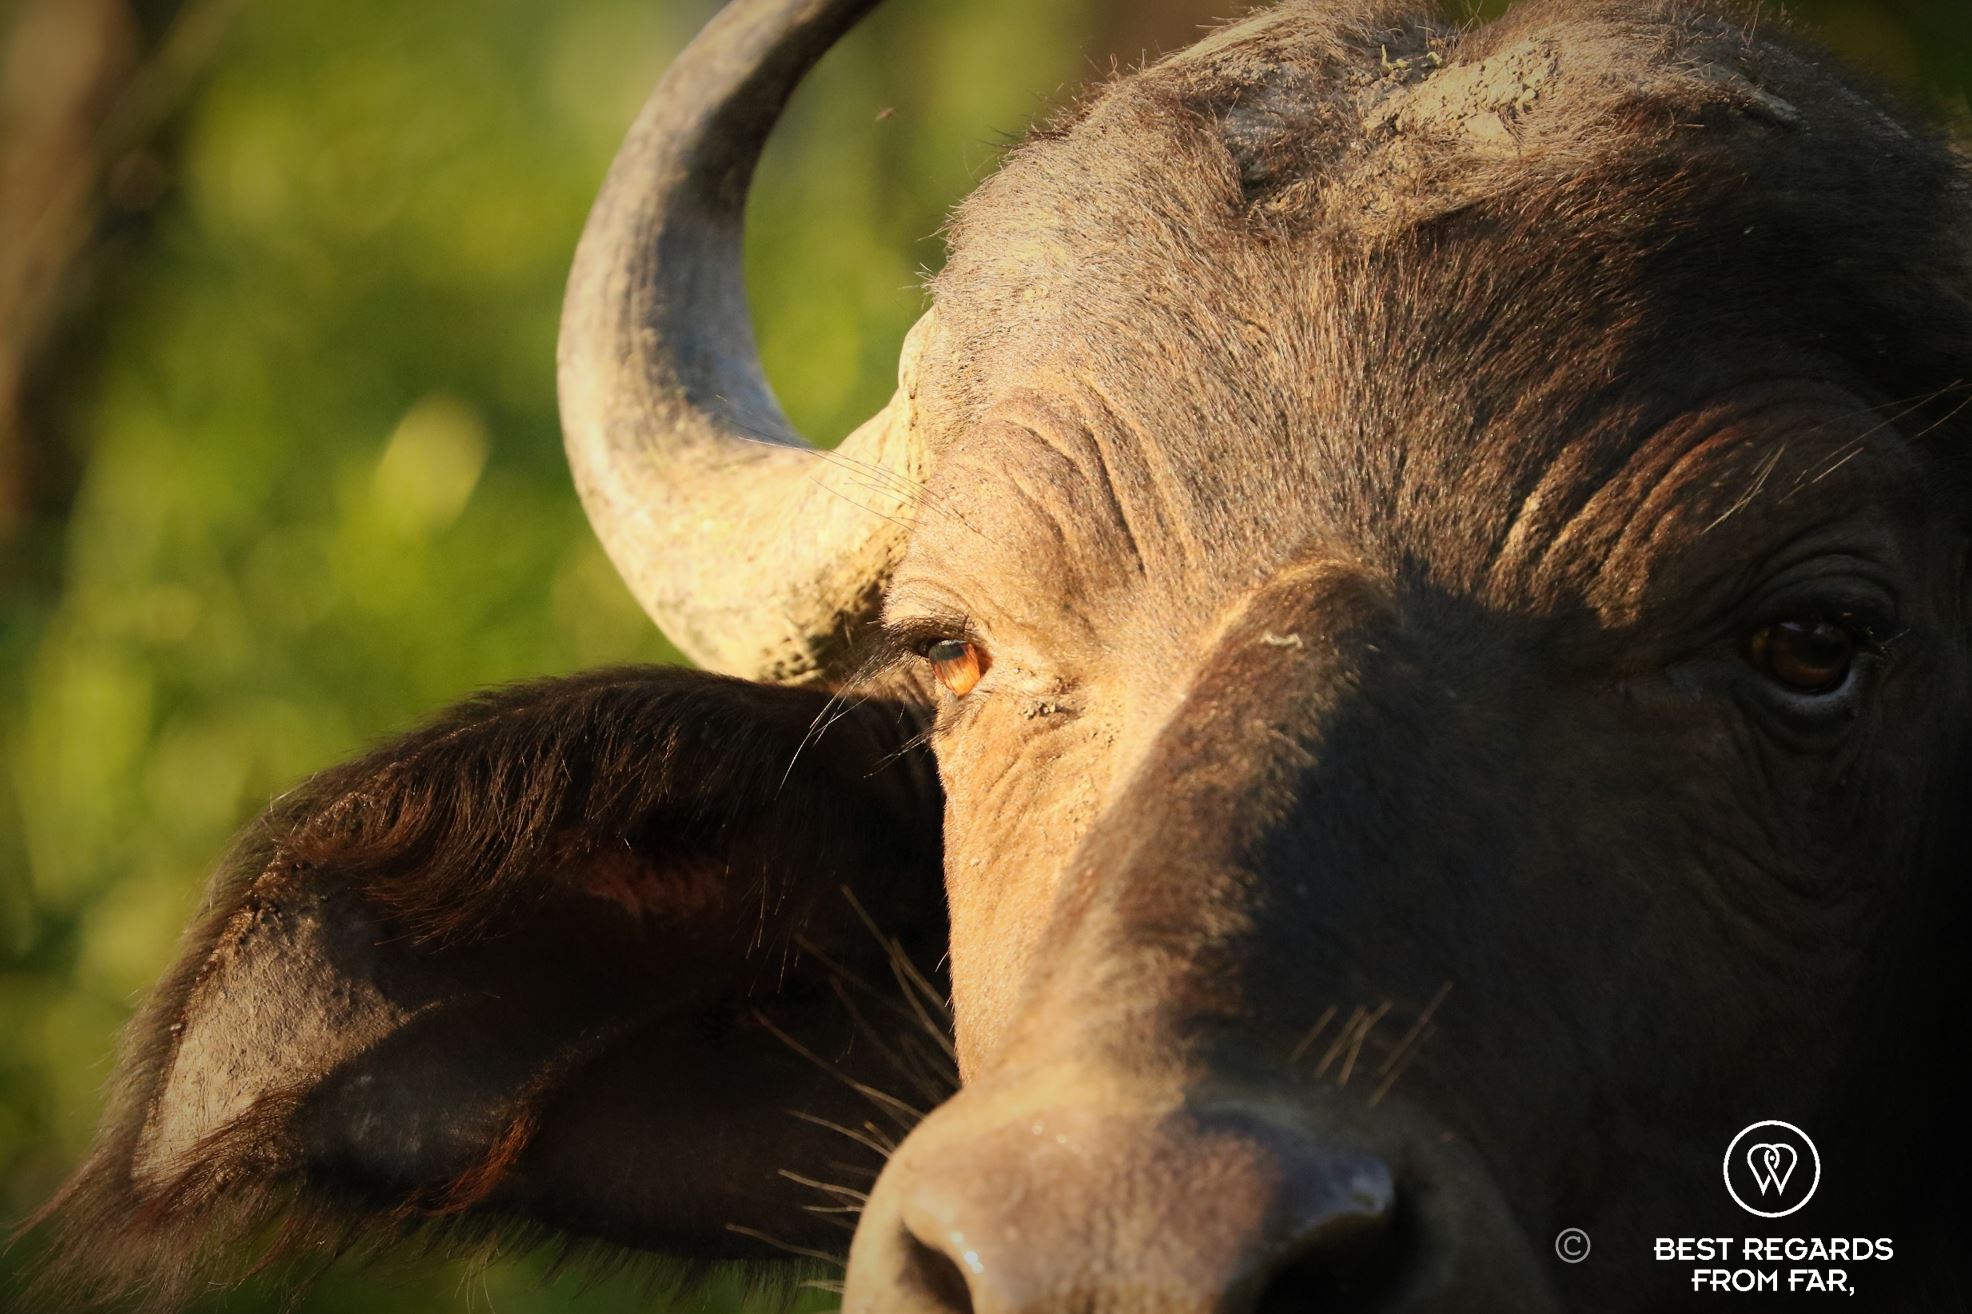 Close-up of the head of a buffalo in Hluhluwe iMfolozi, South Africa.